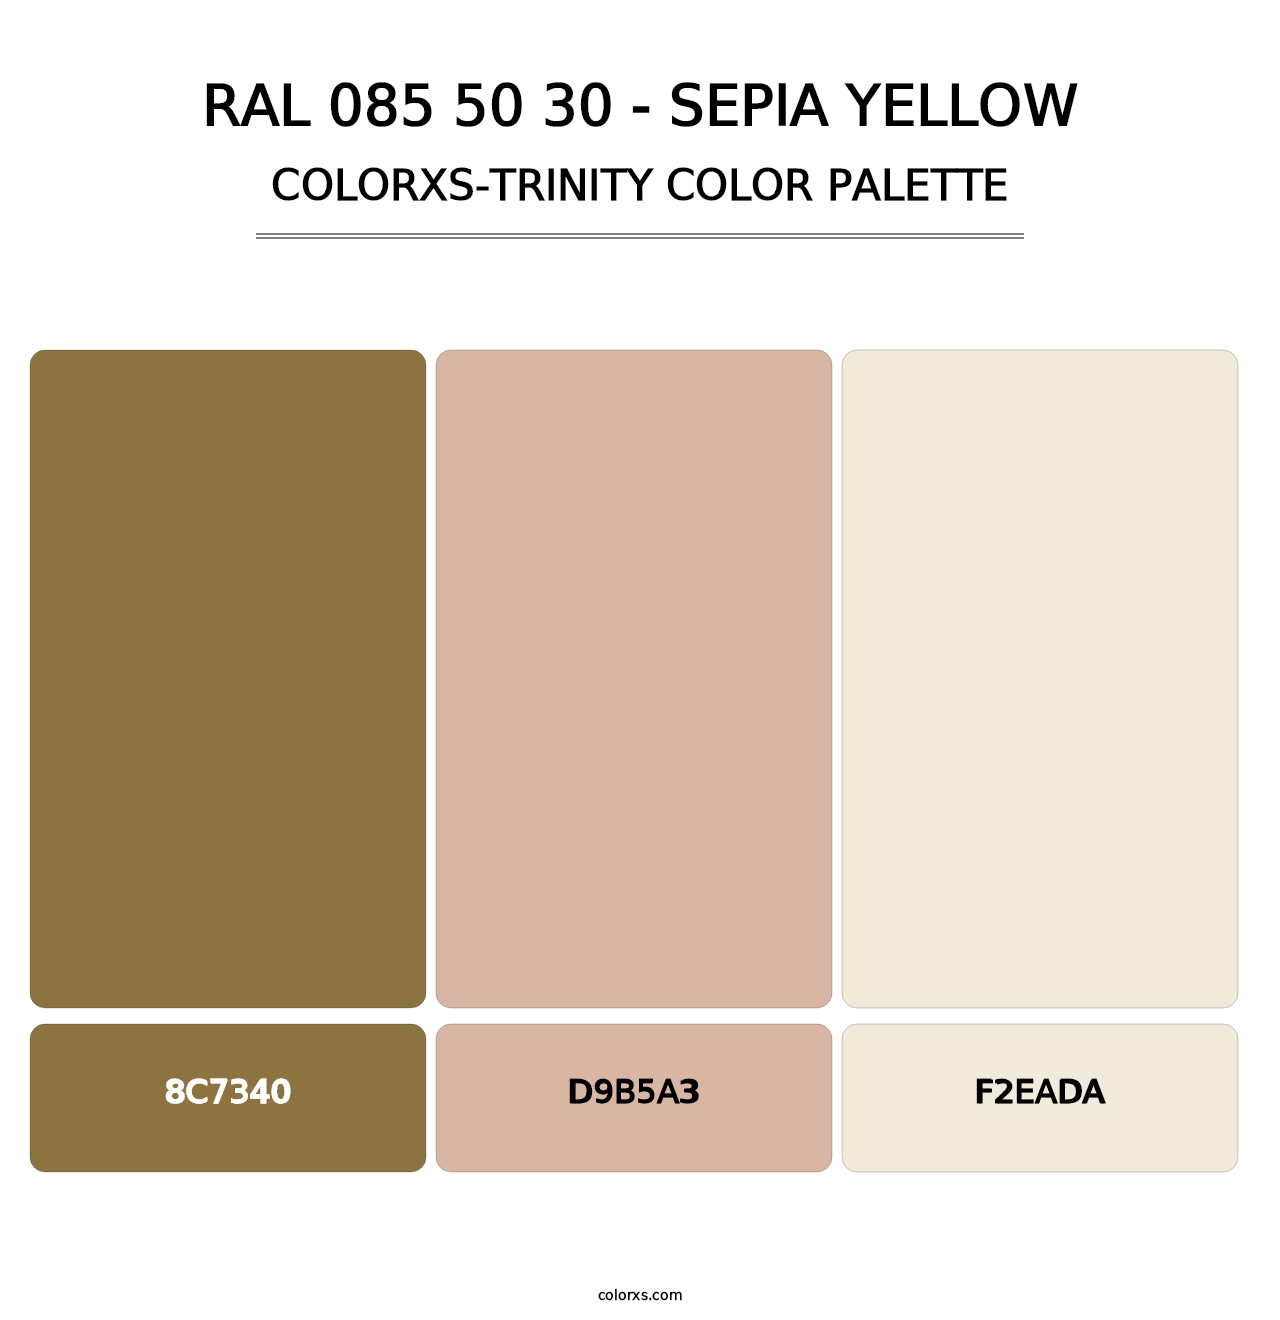 RAL 085 50 30 - Sepia Yellow - Colorxs Trinity Palette